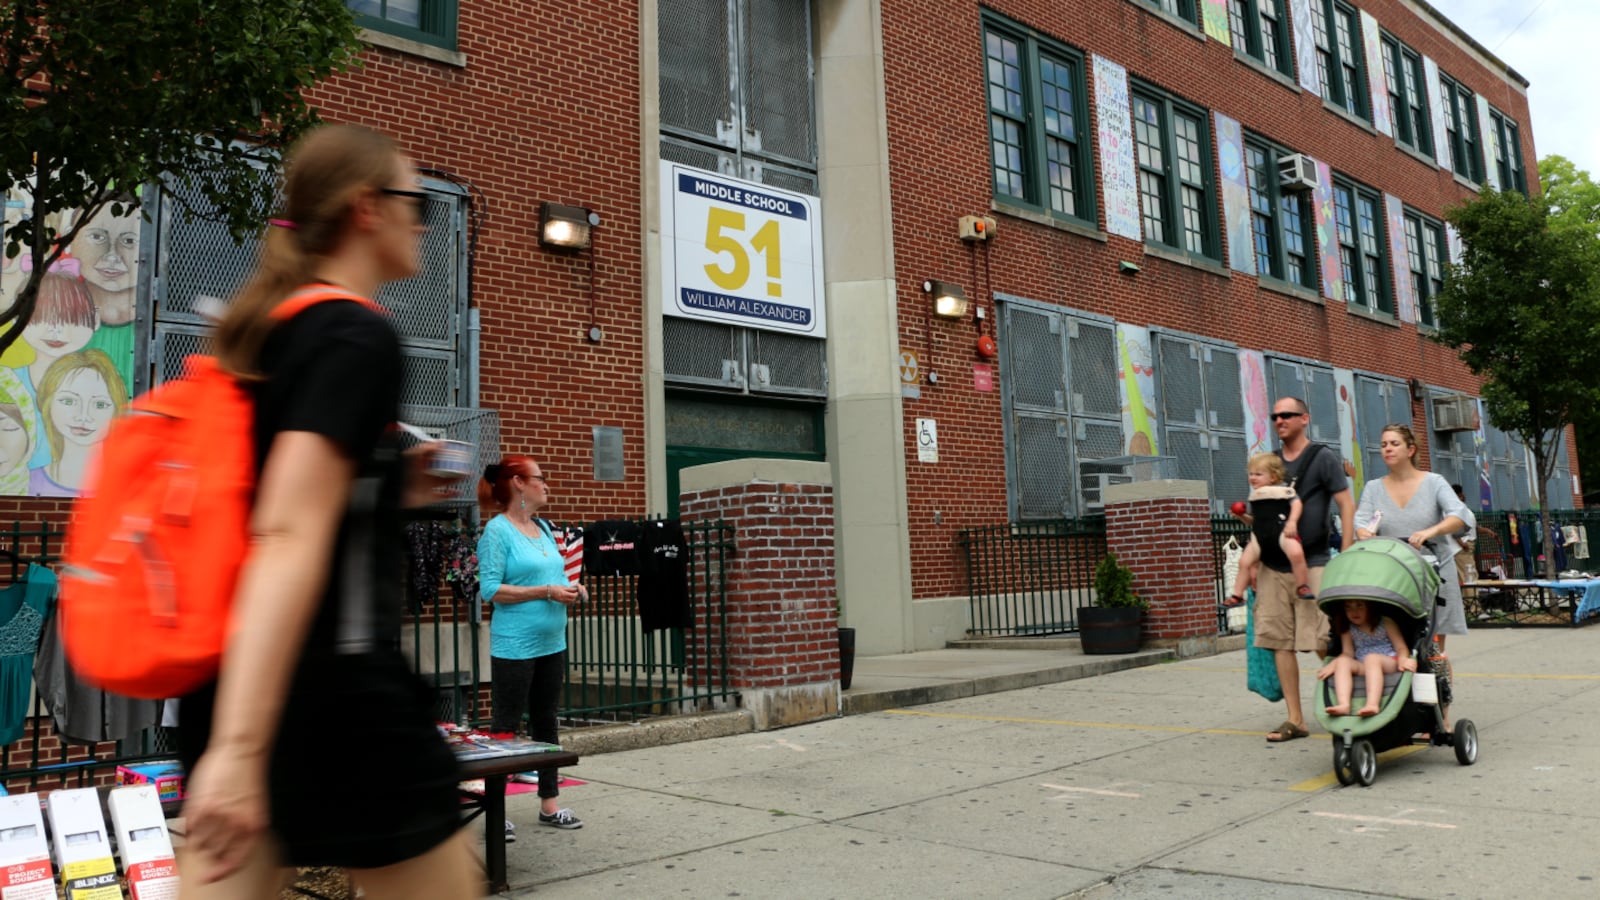 A person wearing an orange backpack walks past a brick school with a few other people in the background.